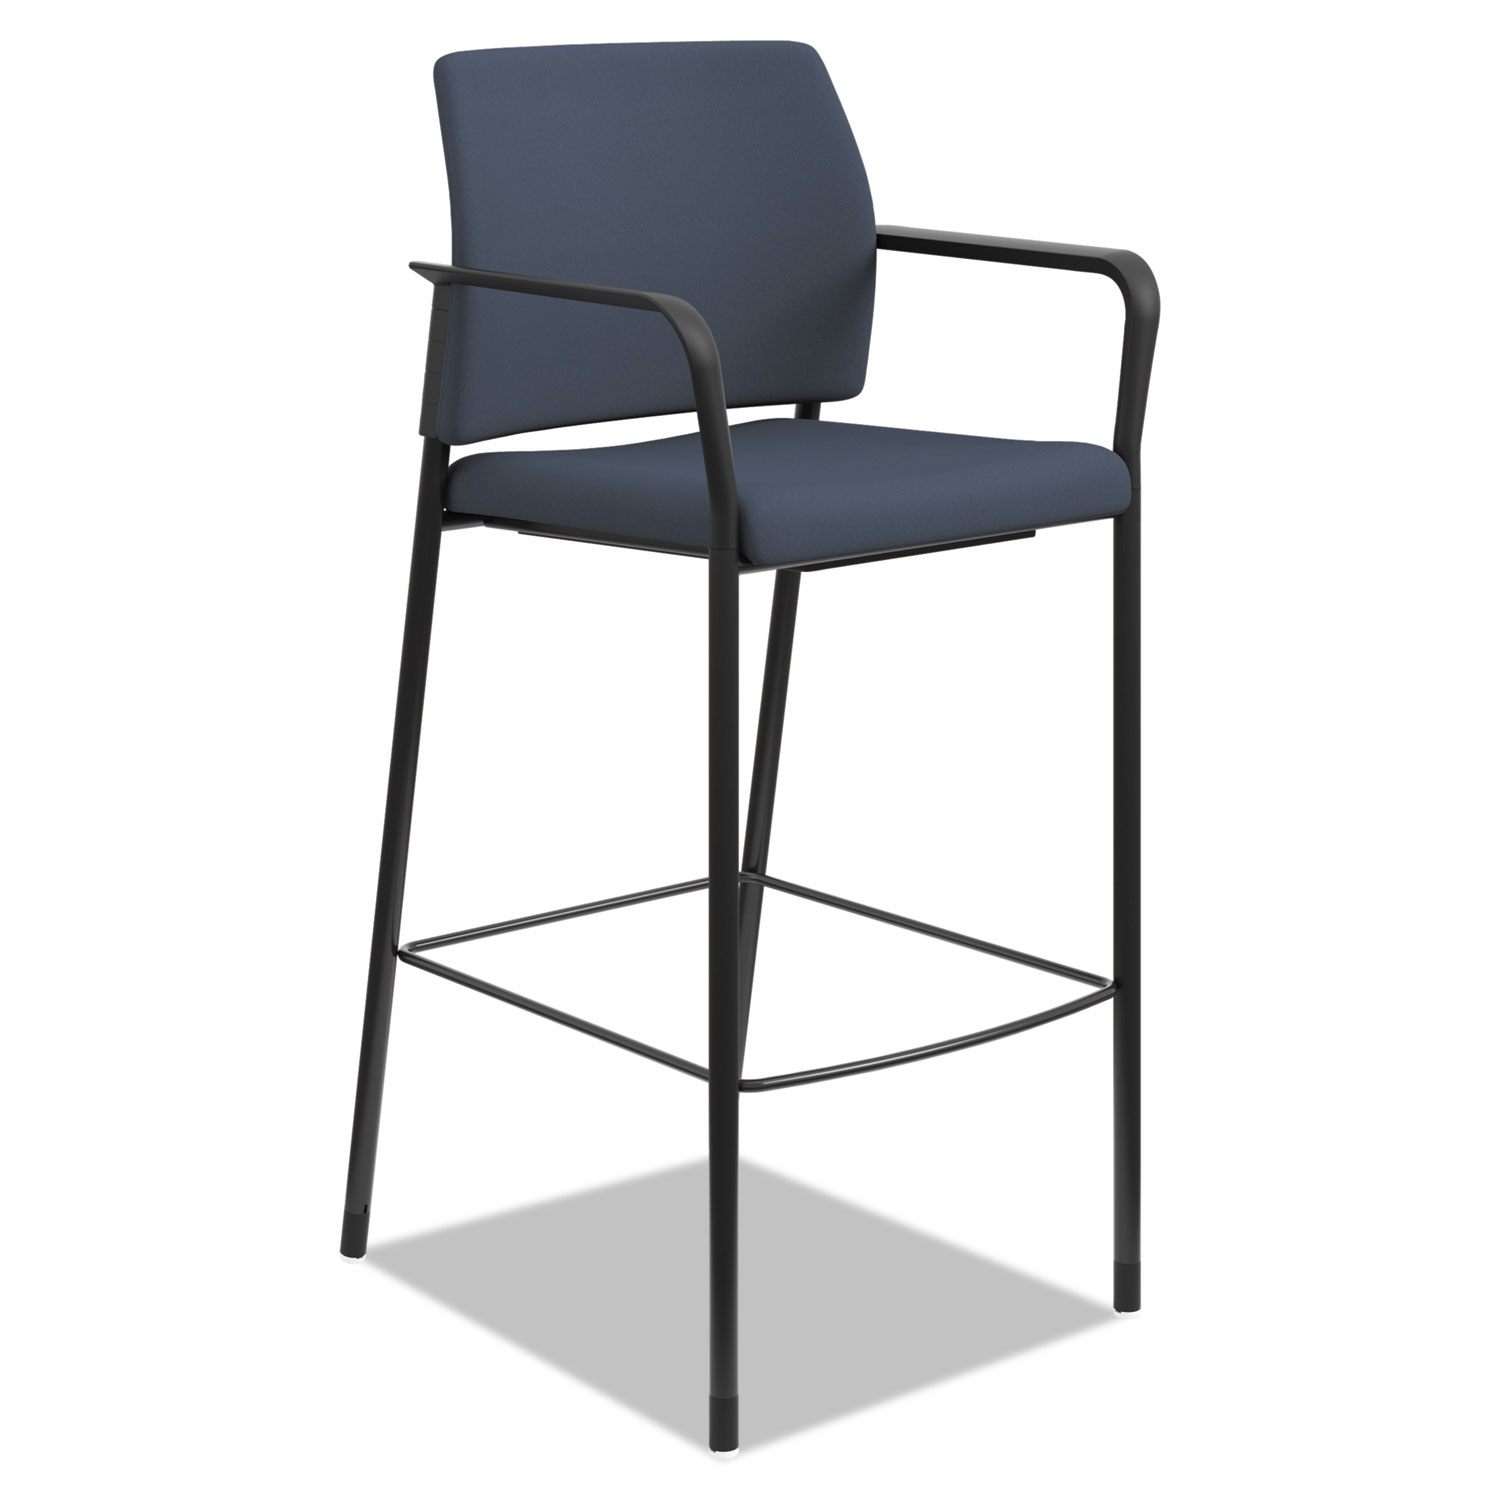 Accommodate™ Series Café Stool with Fixed Arms, Cerulean Fabric